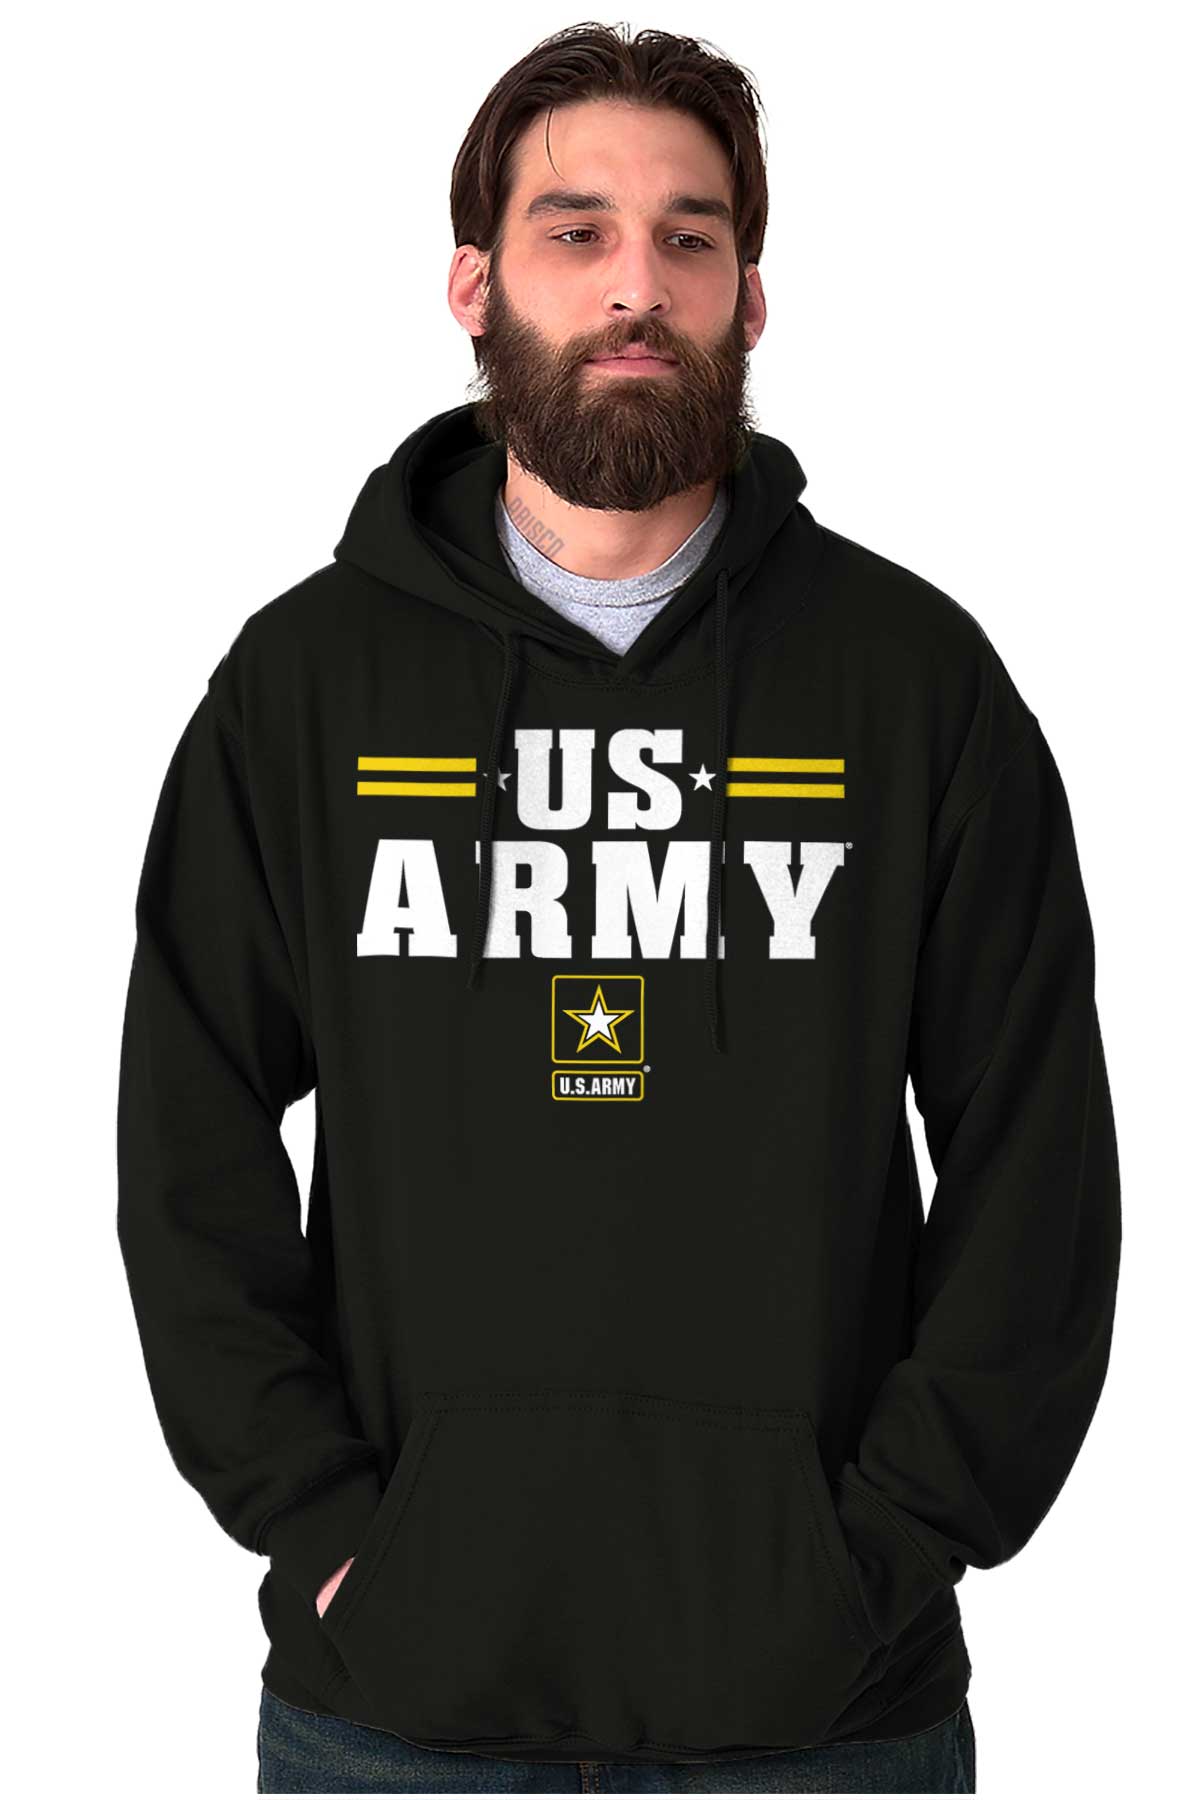 United States Army Officially Licensed Logo Hoodies Sweat Shirts ...